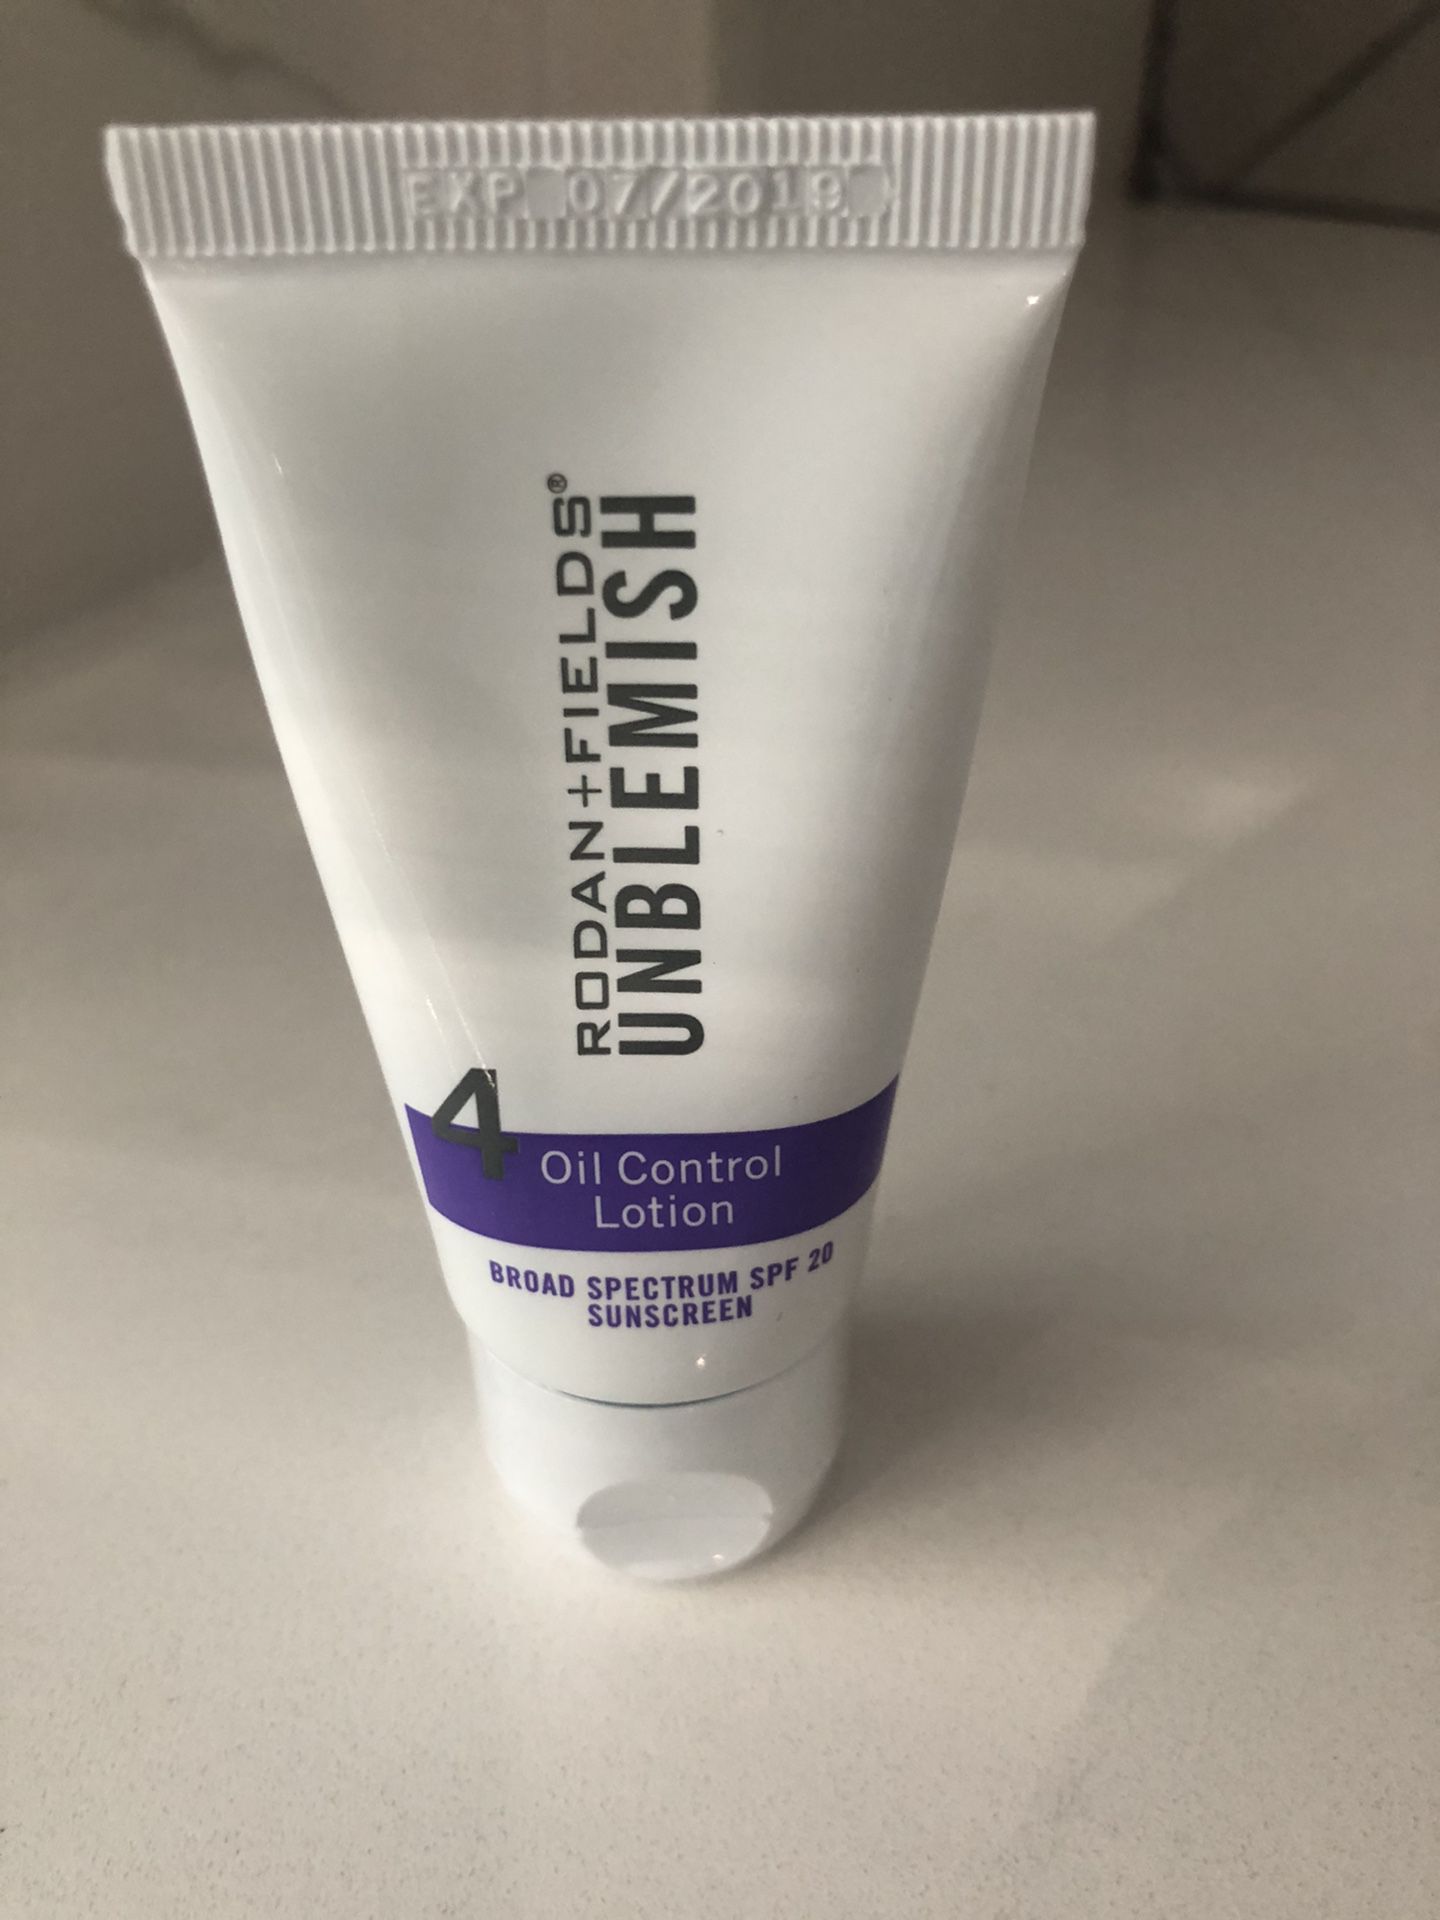 Rodan and Fields Unblemish Oil Control Lotion -SPF20 - Brand New Sealed + Makeup purple Bag( Optional)